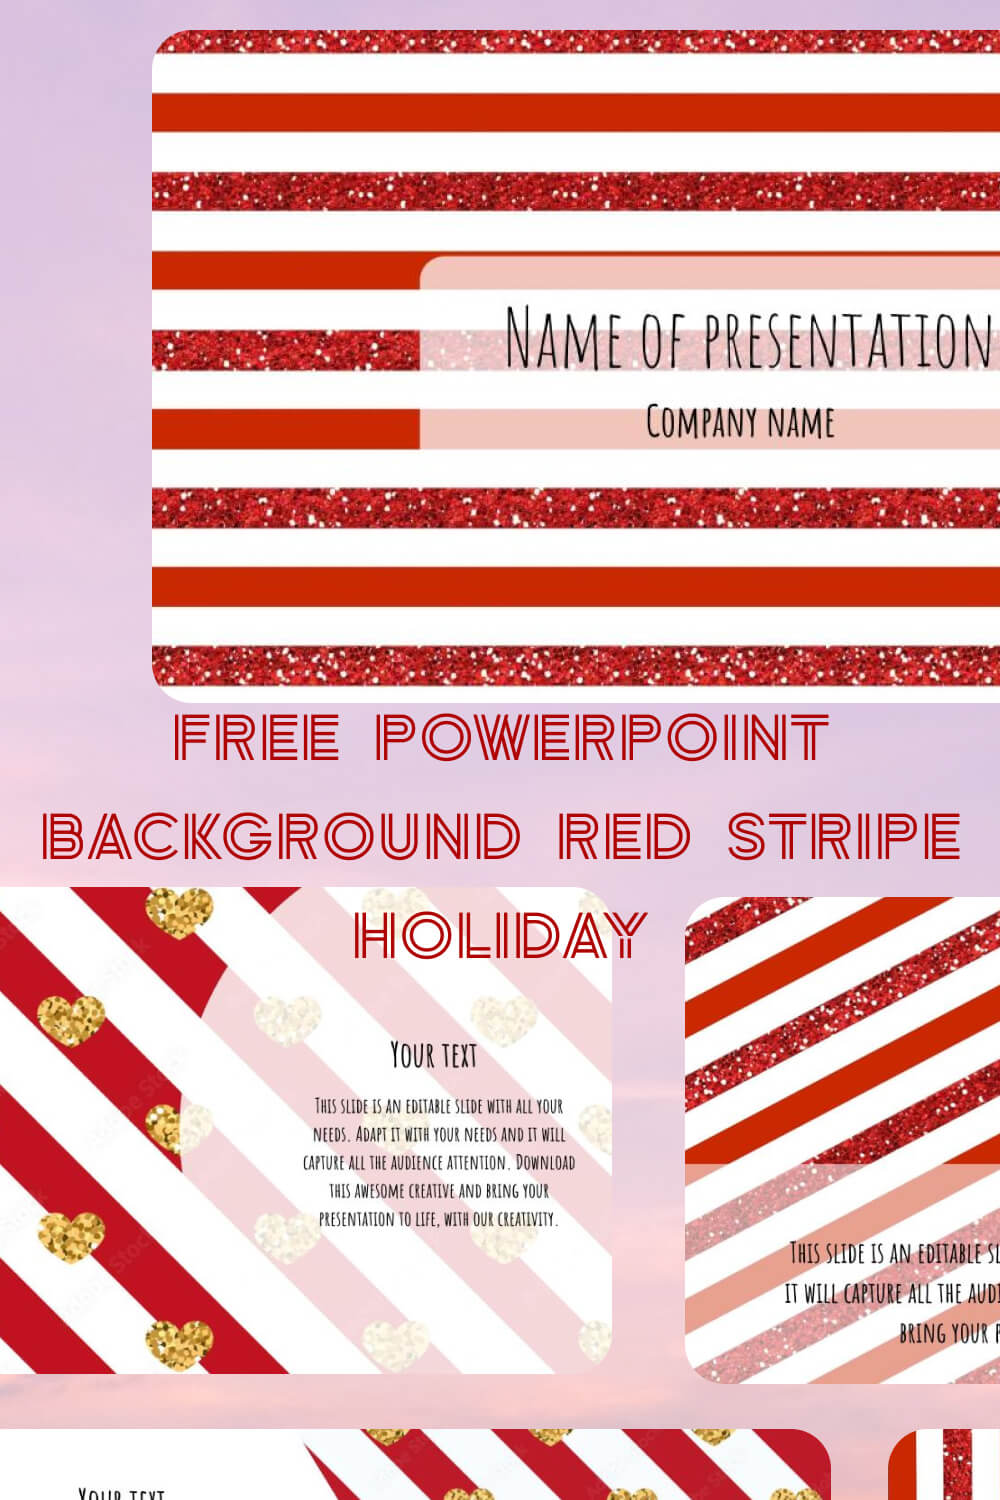 free powerpoint background red stripe holiday 3